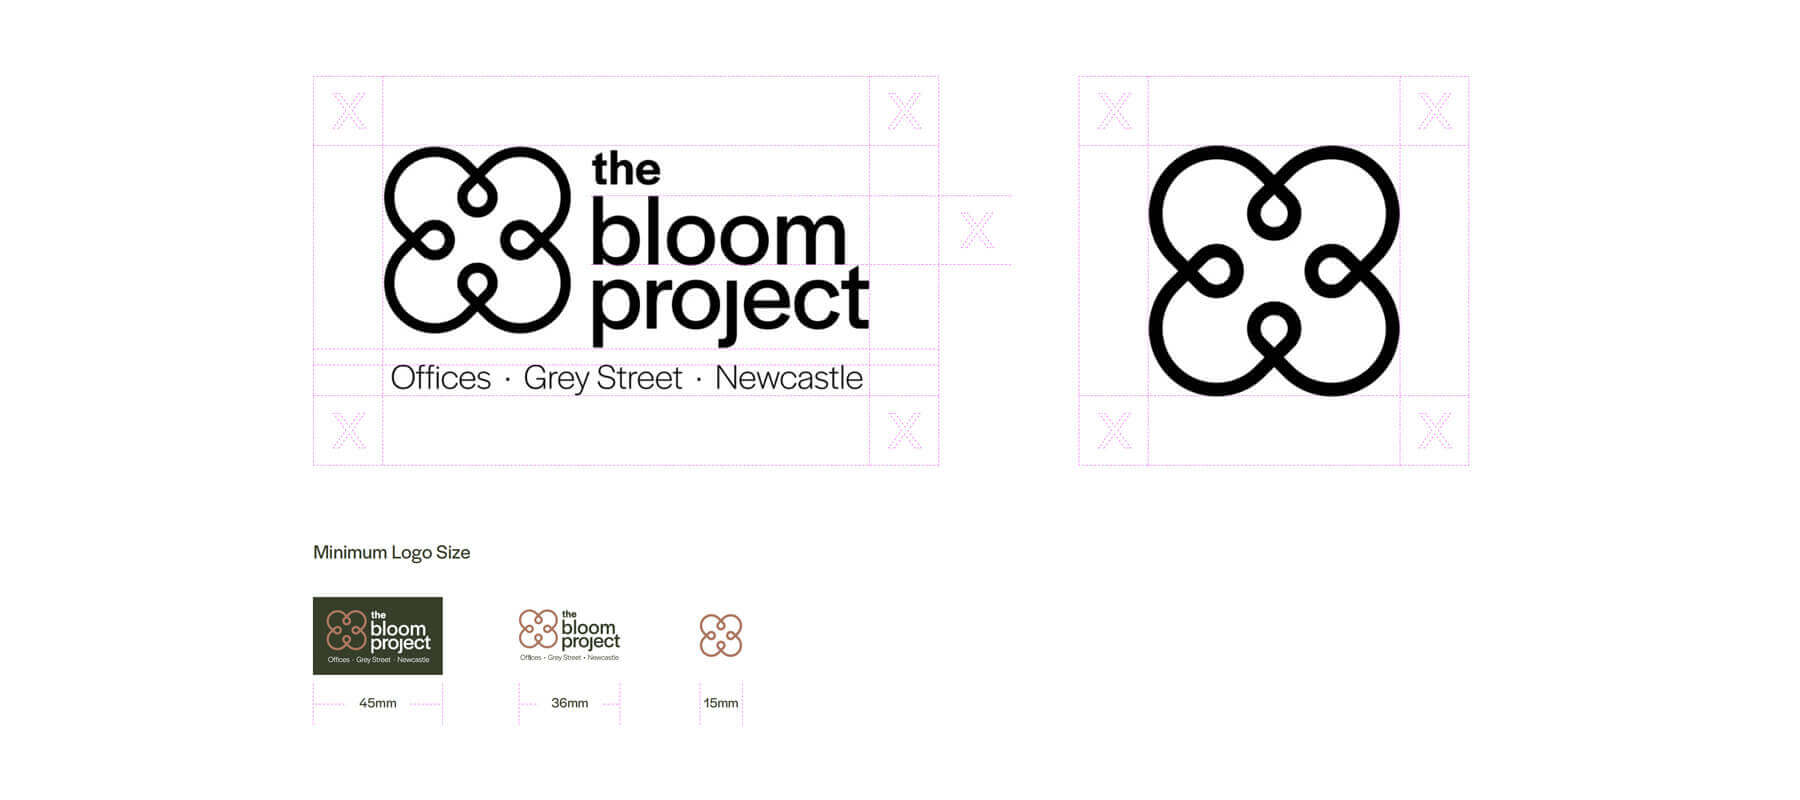 The Bloom Project Logo Sizes